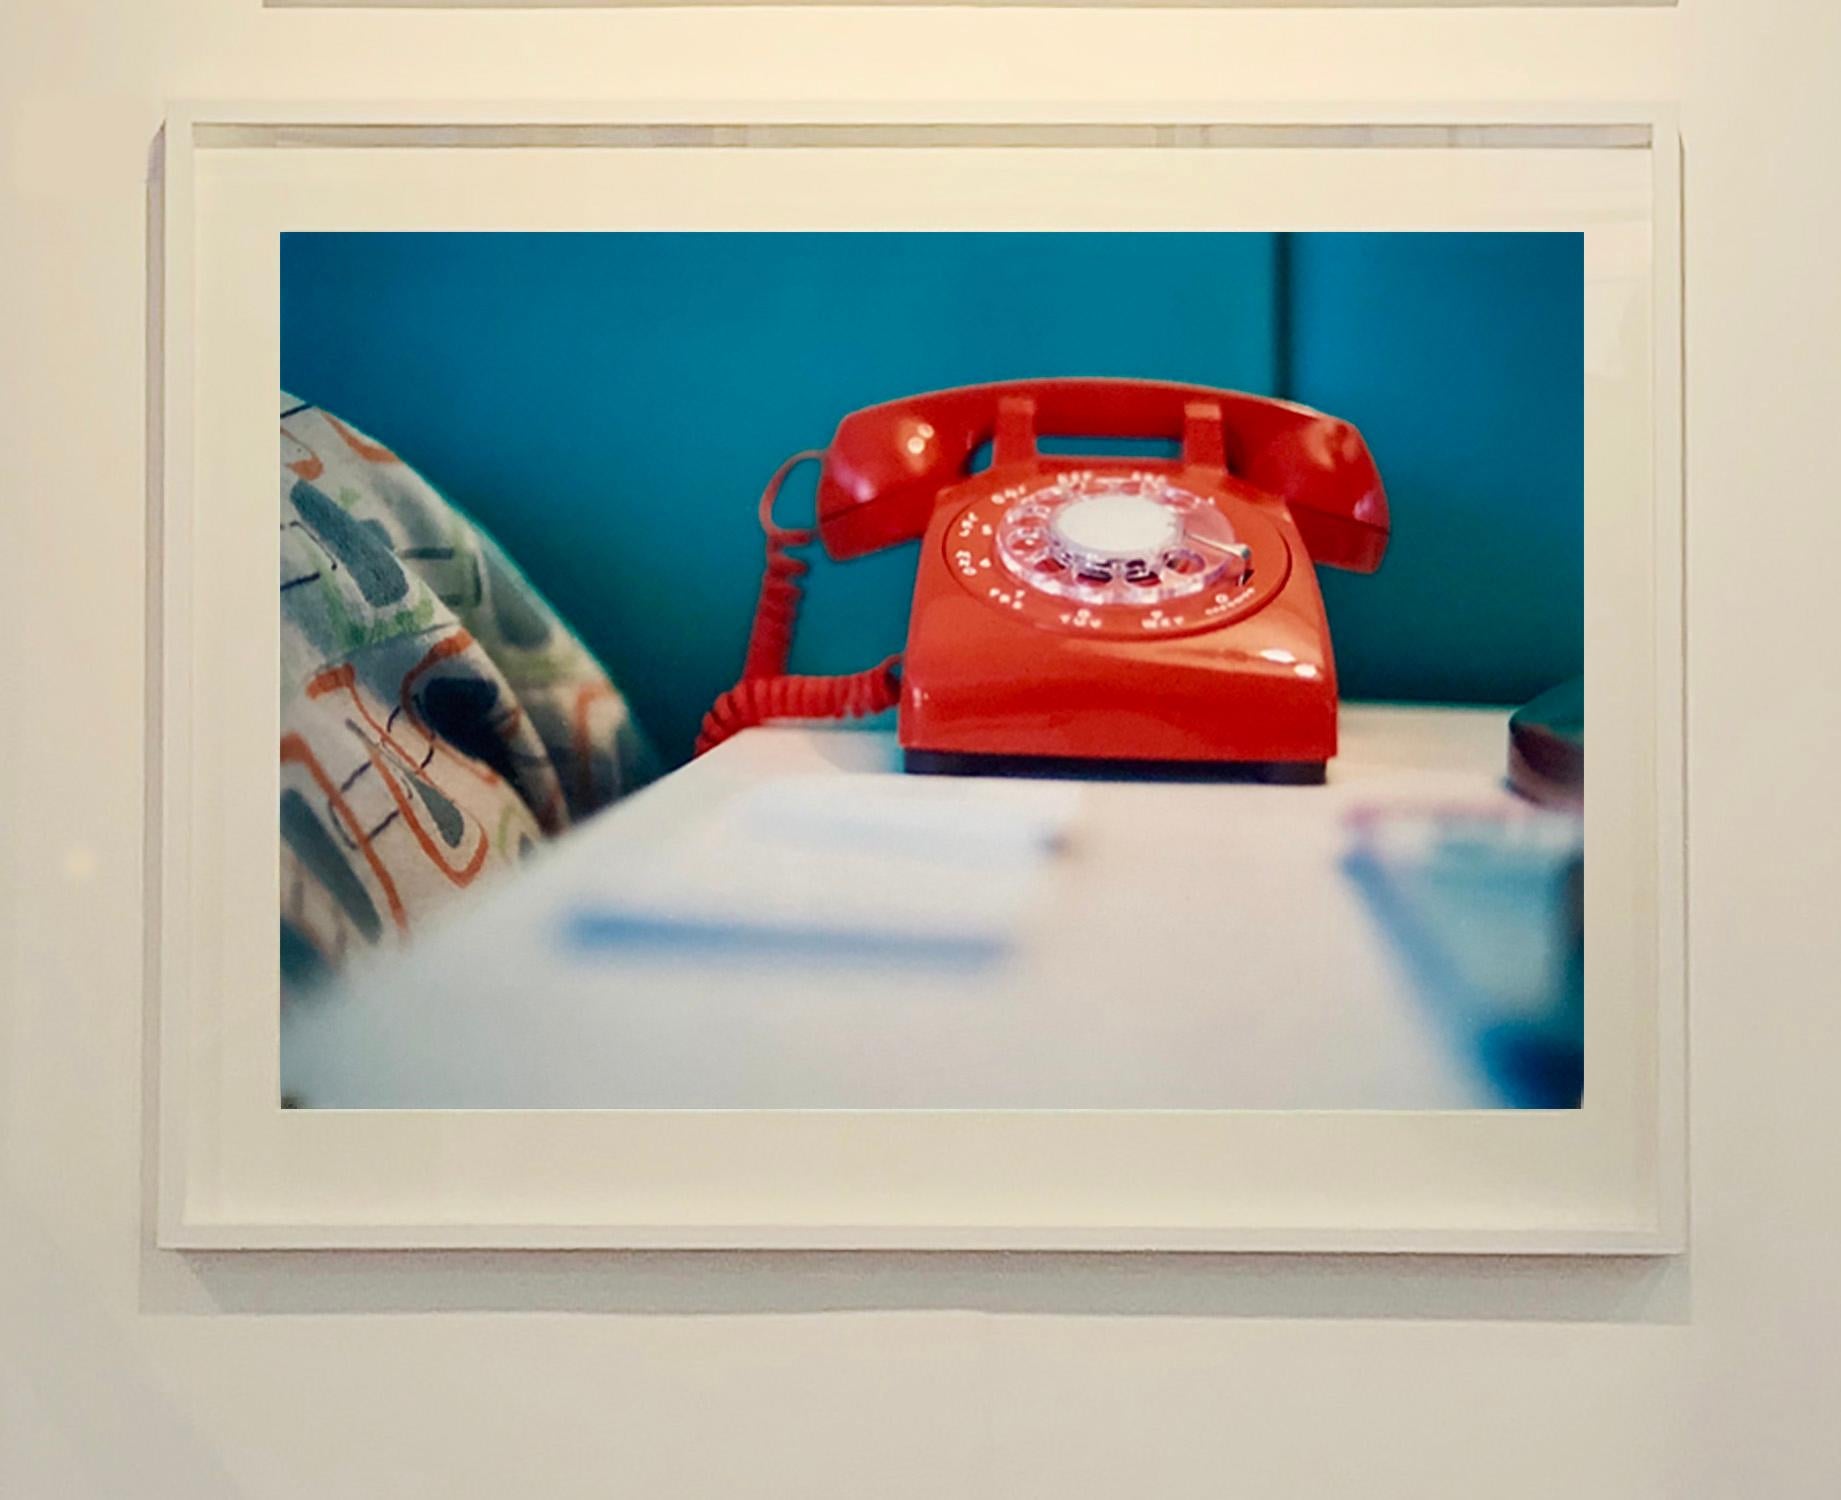 Part of Richard Heeps 'Dream in Colour' Series, this cool Palm Springs interiors picture featuring a vintage telephone on a nightstand combines gorgeous colours and dreamy nostalgic mid-century vibes.

This artwork is a limited edition of 25 gloss